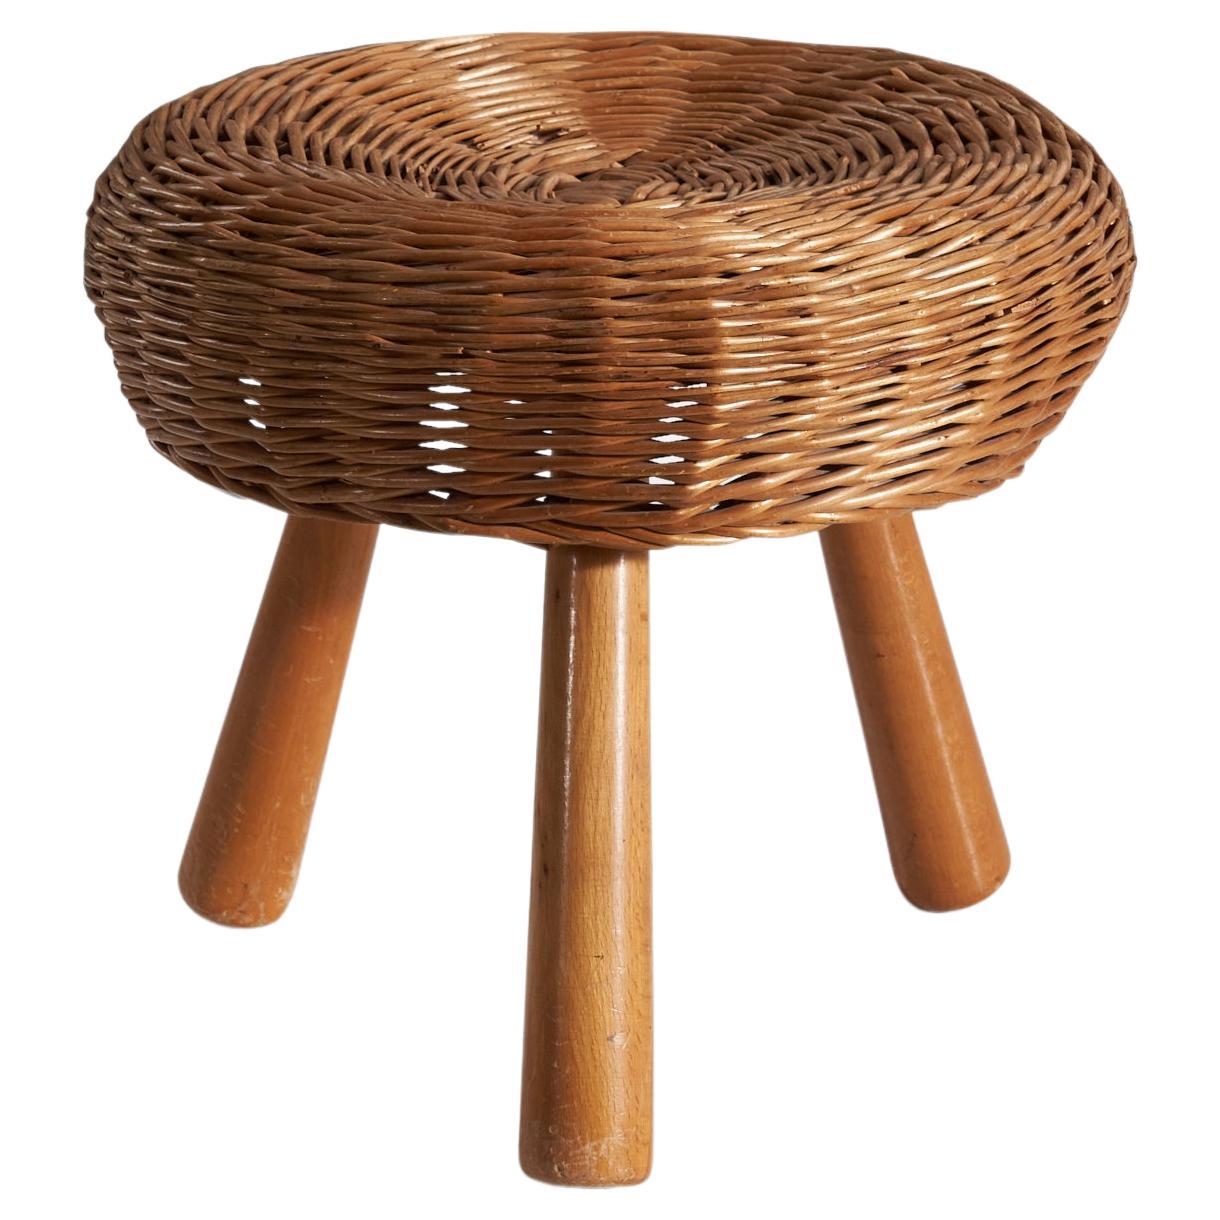 Tony Paul, “Attributed” Stool, Wicker, Wood, United States, 1950s For Sale